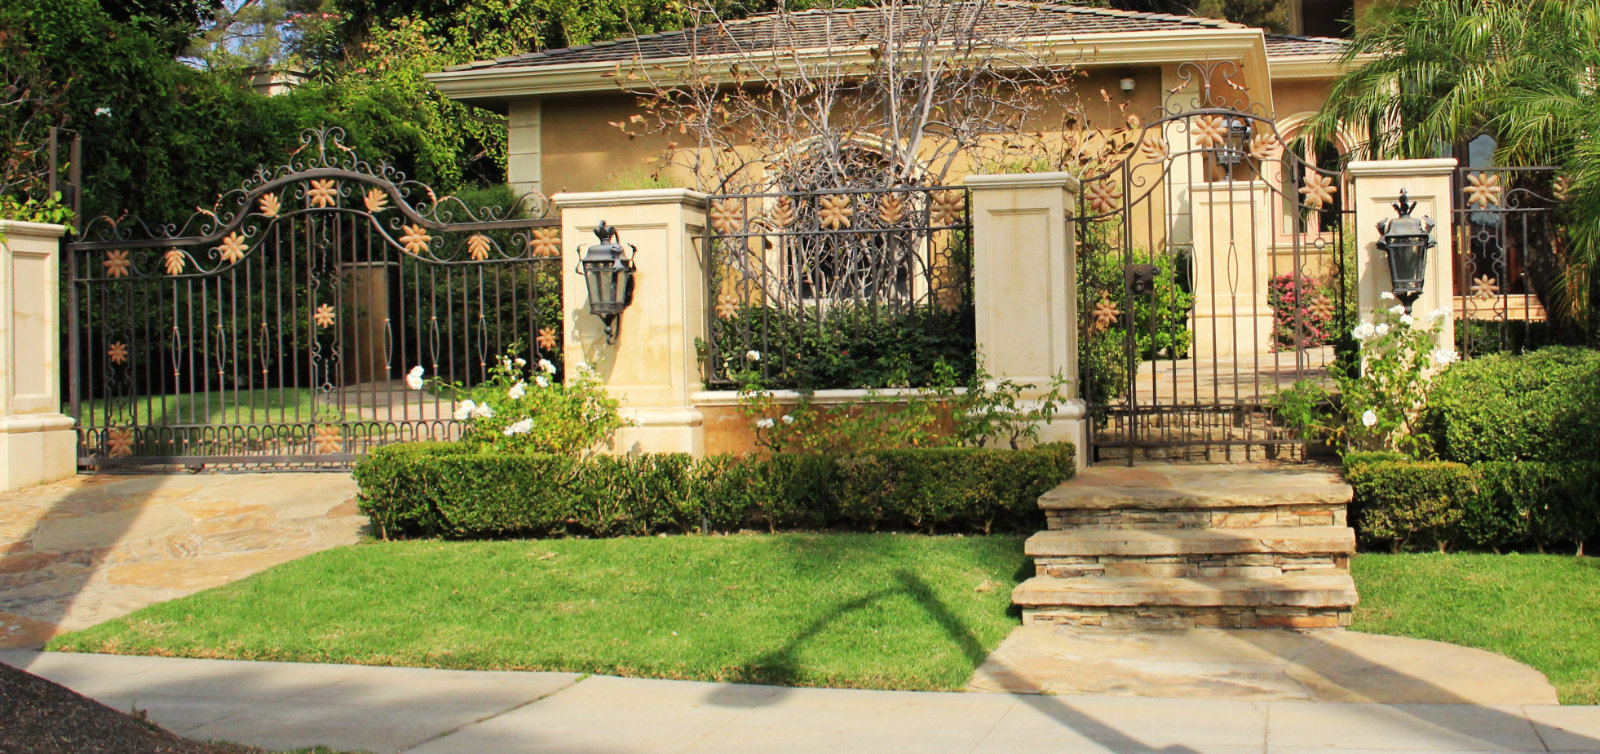 wrought iron electric gate and pedestrian gate with tropical flowers leaves Los Angeles